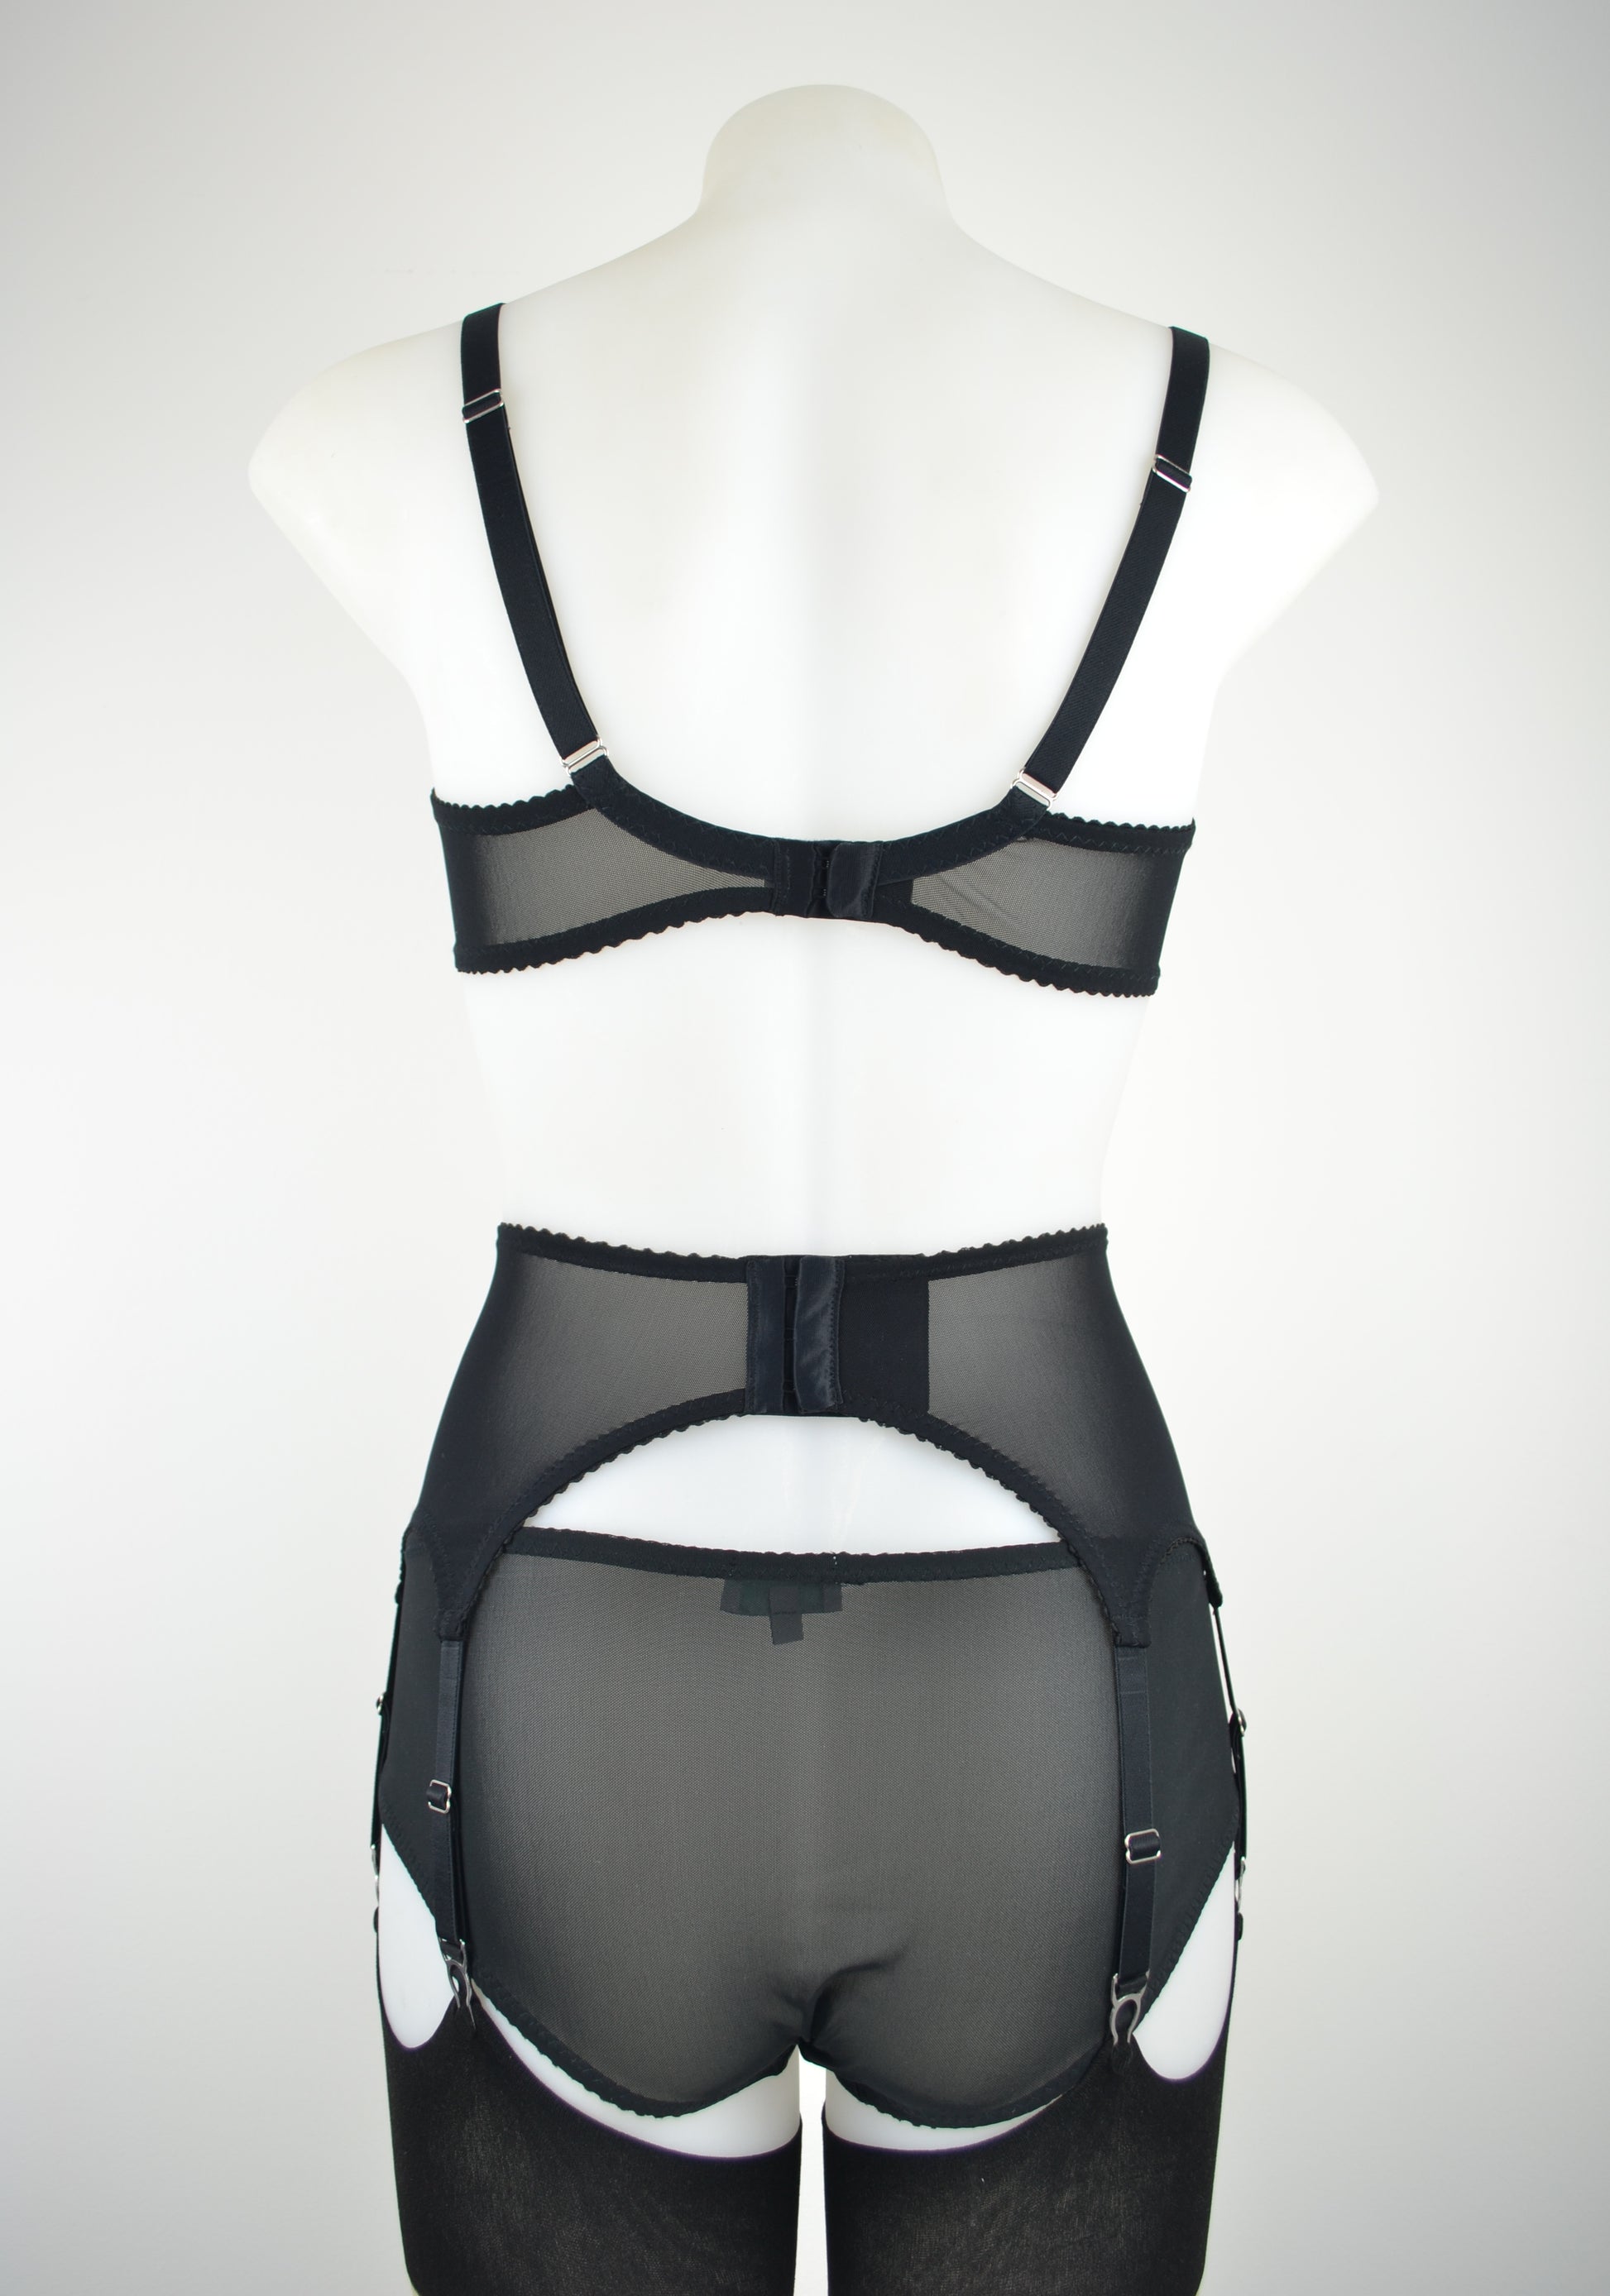 luxury black silk suspender belt lingerie with 6 metal clips. Available in plus size and ethically and sustainably made in the uk by retro and vintage lingerie brand pip and pantalaimon. Transgender non-binary underwear and lingerie